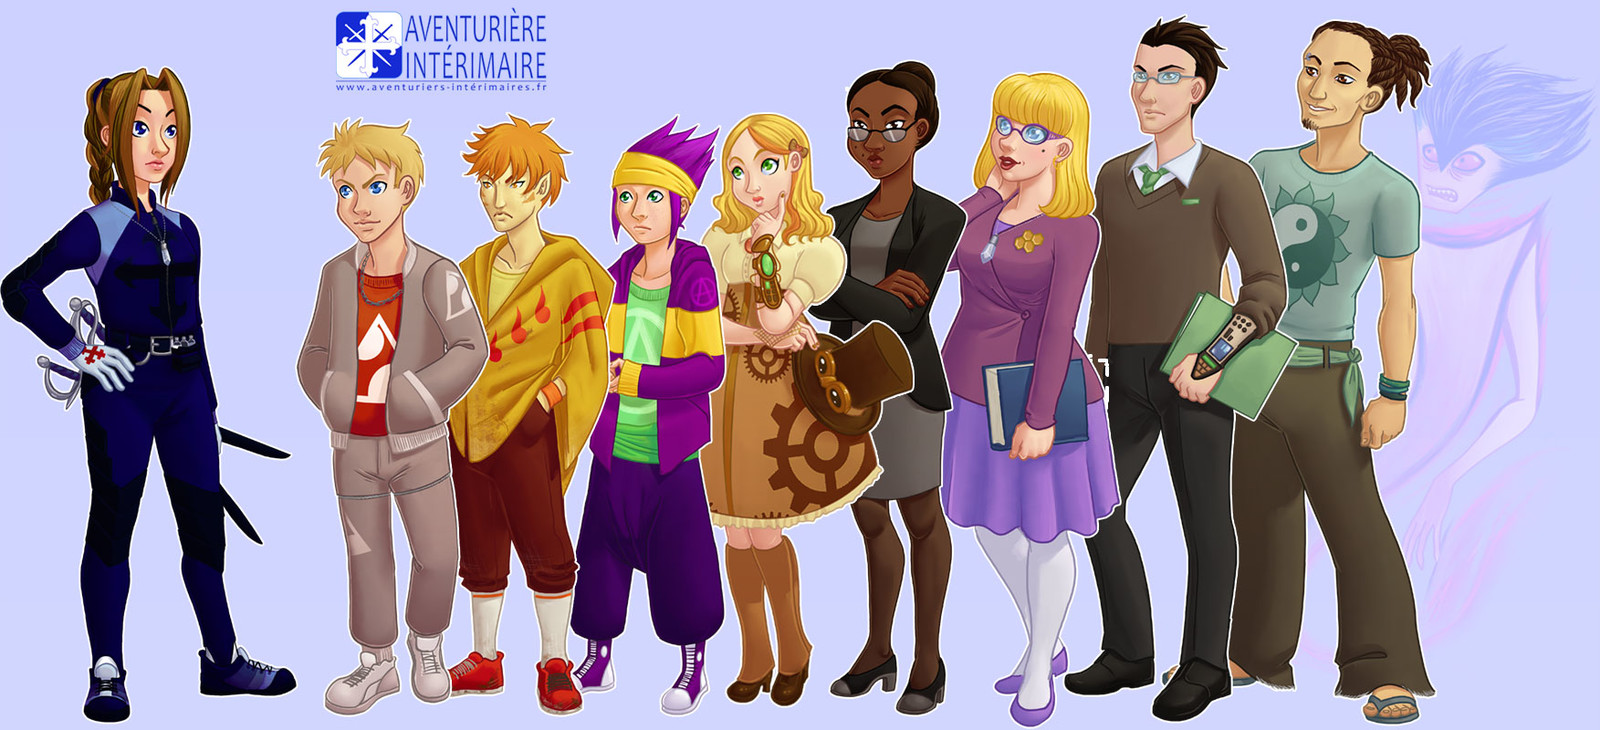 All the characters of the visual novel: Aventurière Intérimaire: http://xn--aventuriers-intrimaires-pcc.fr/